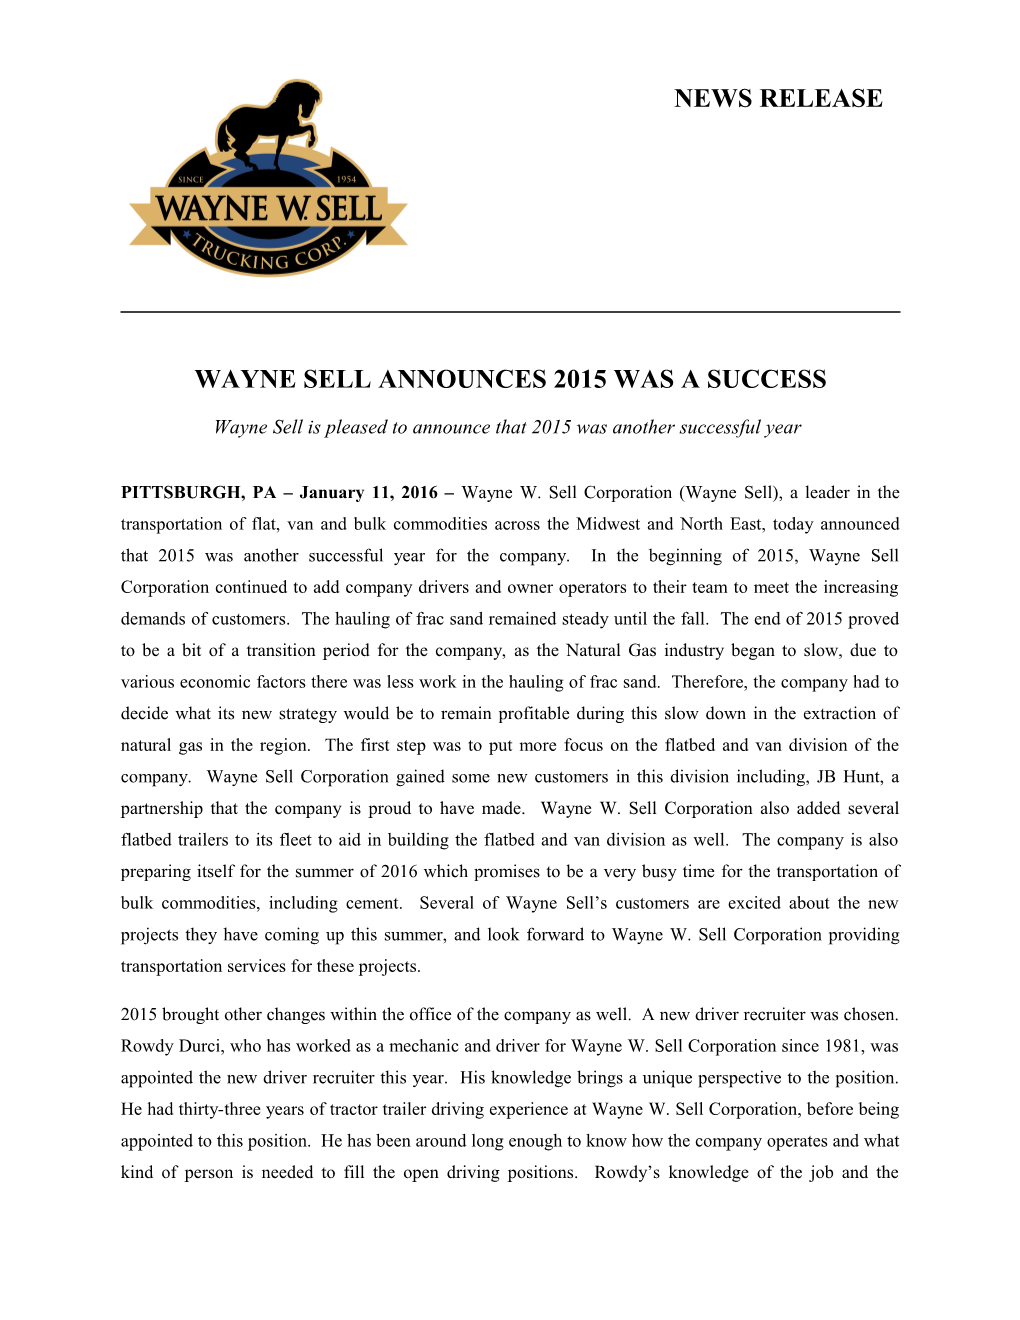 Wayne Sell Announces 2015 Was a Success